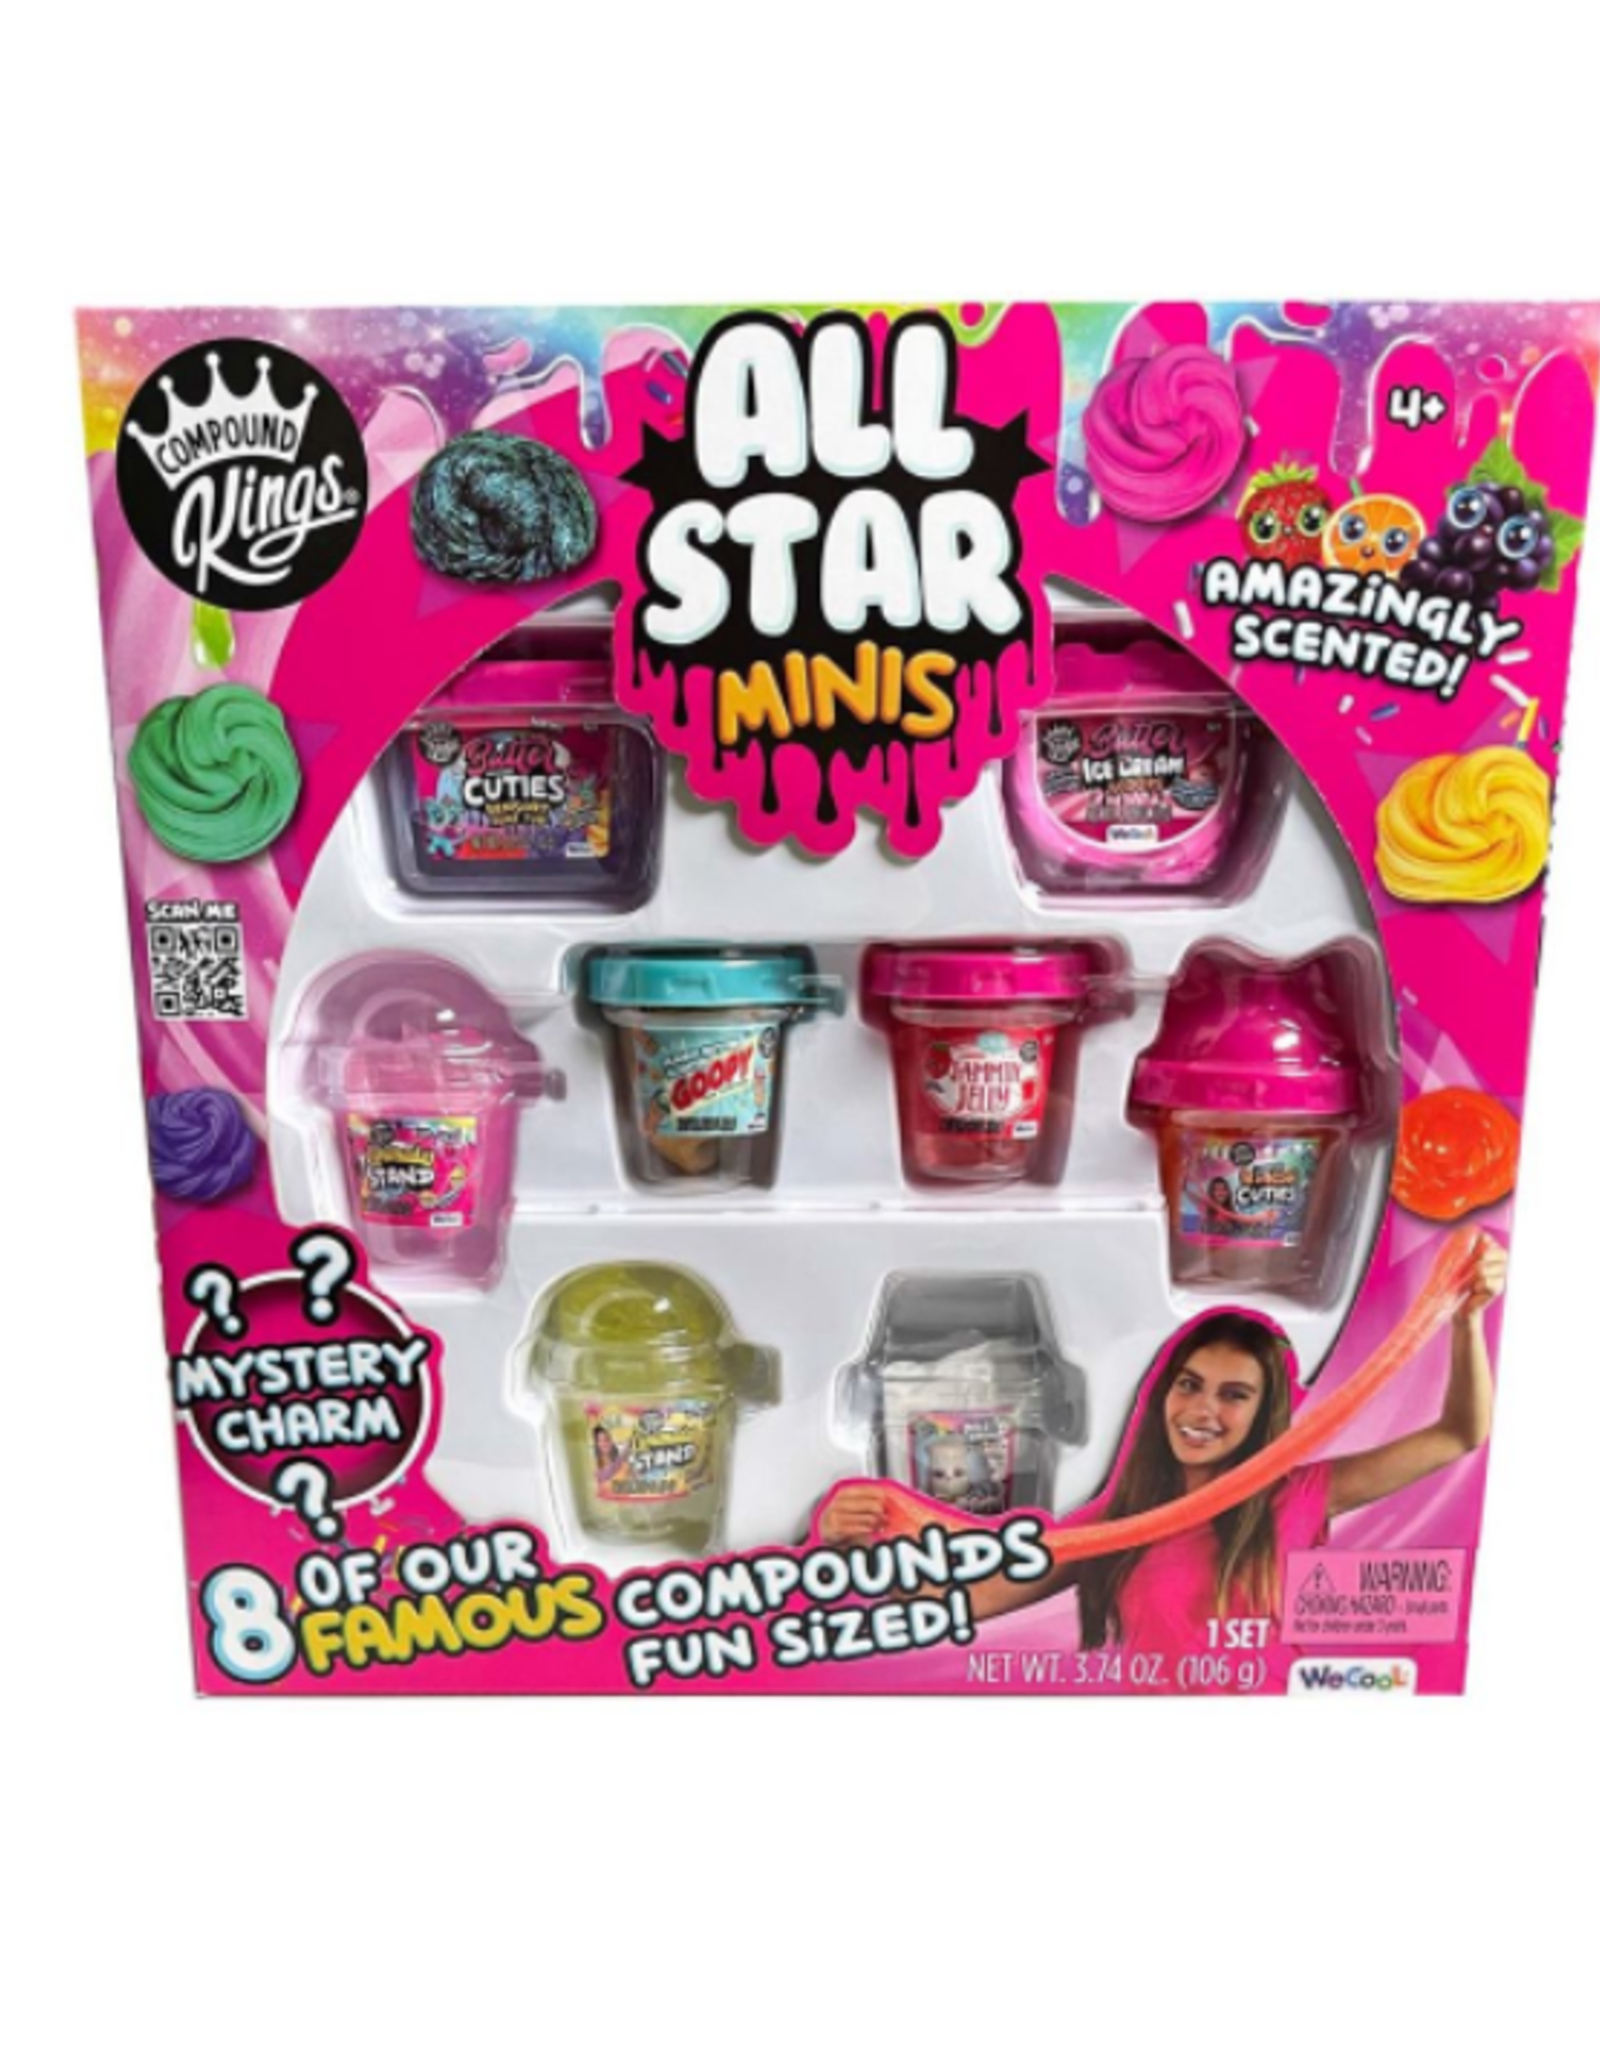 Compound Kings Compound Kings - All Star Minis 8pk